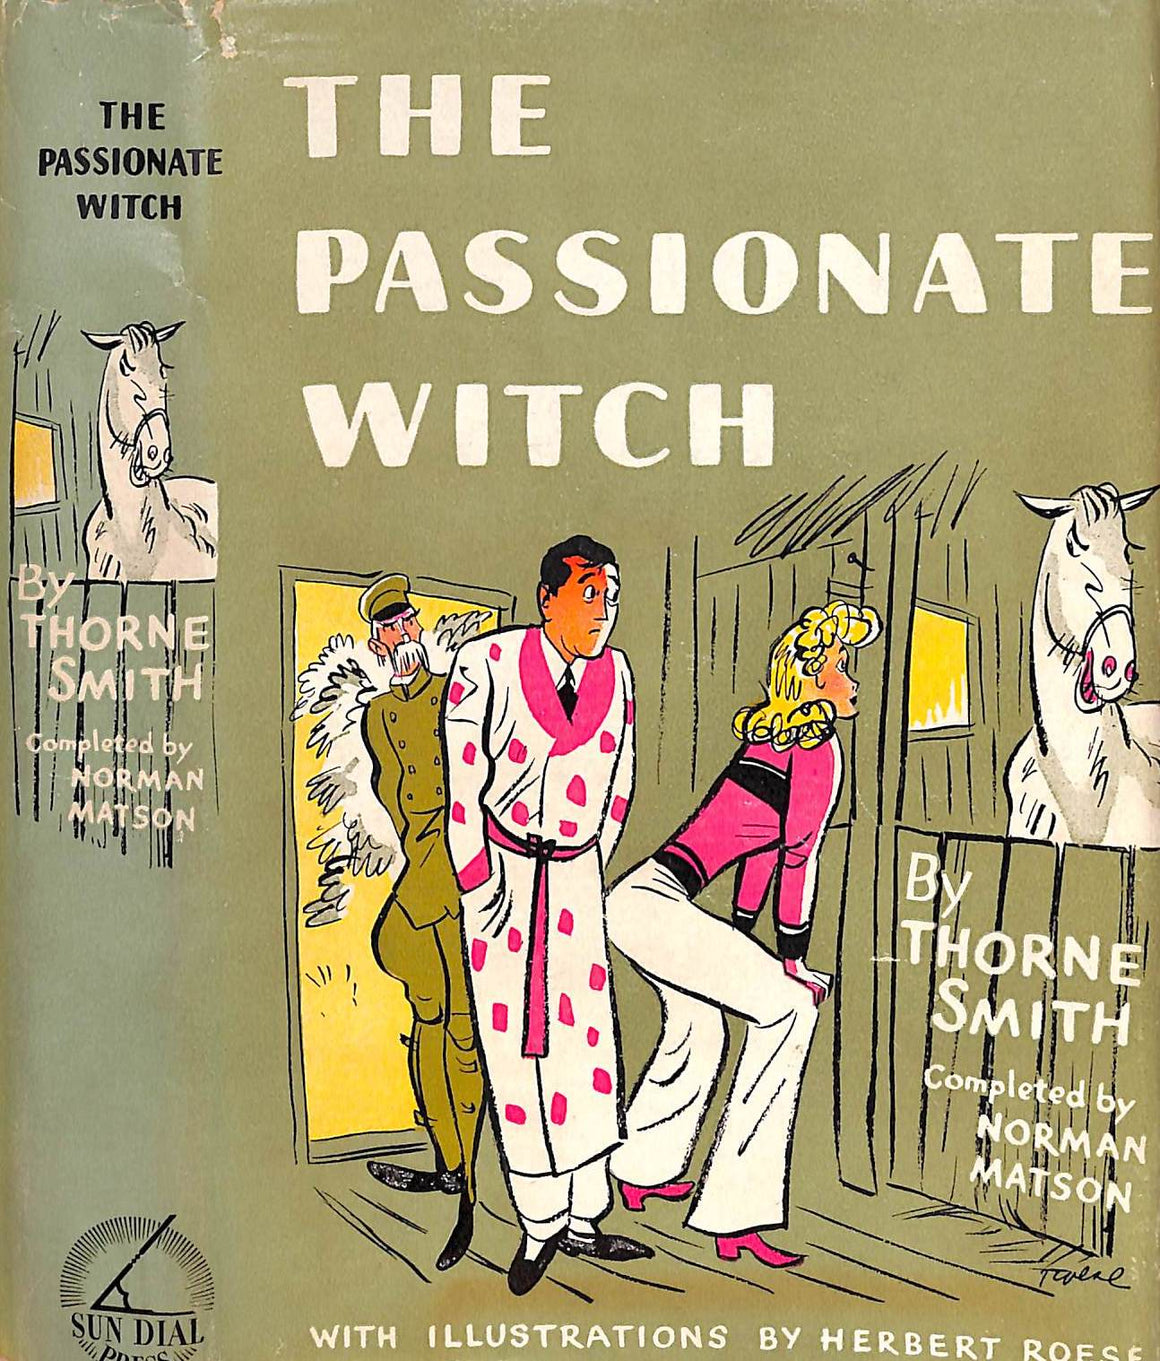 "The Passionate Witch" 1942 SMITH, Thorne